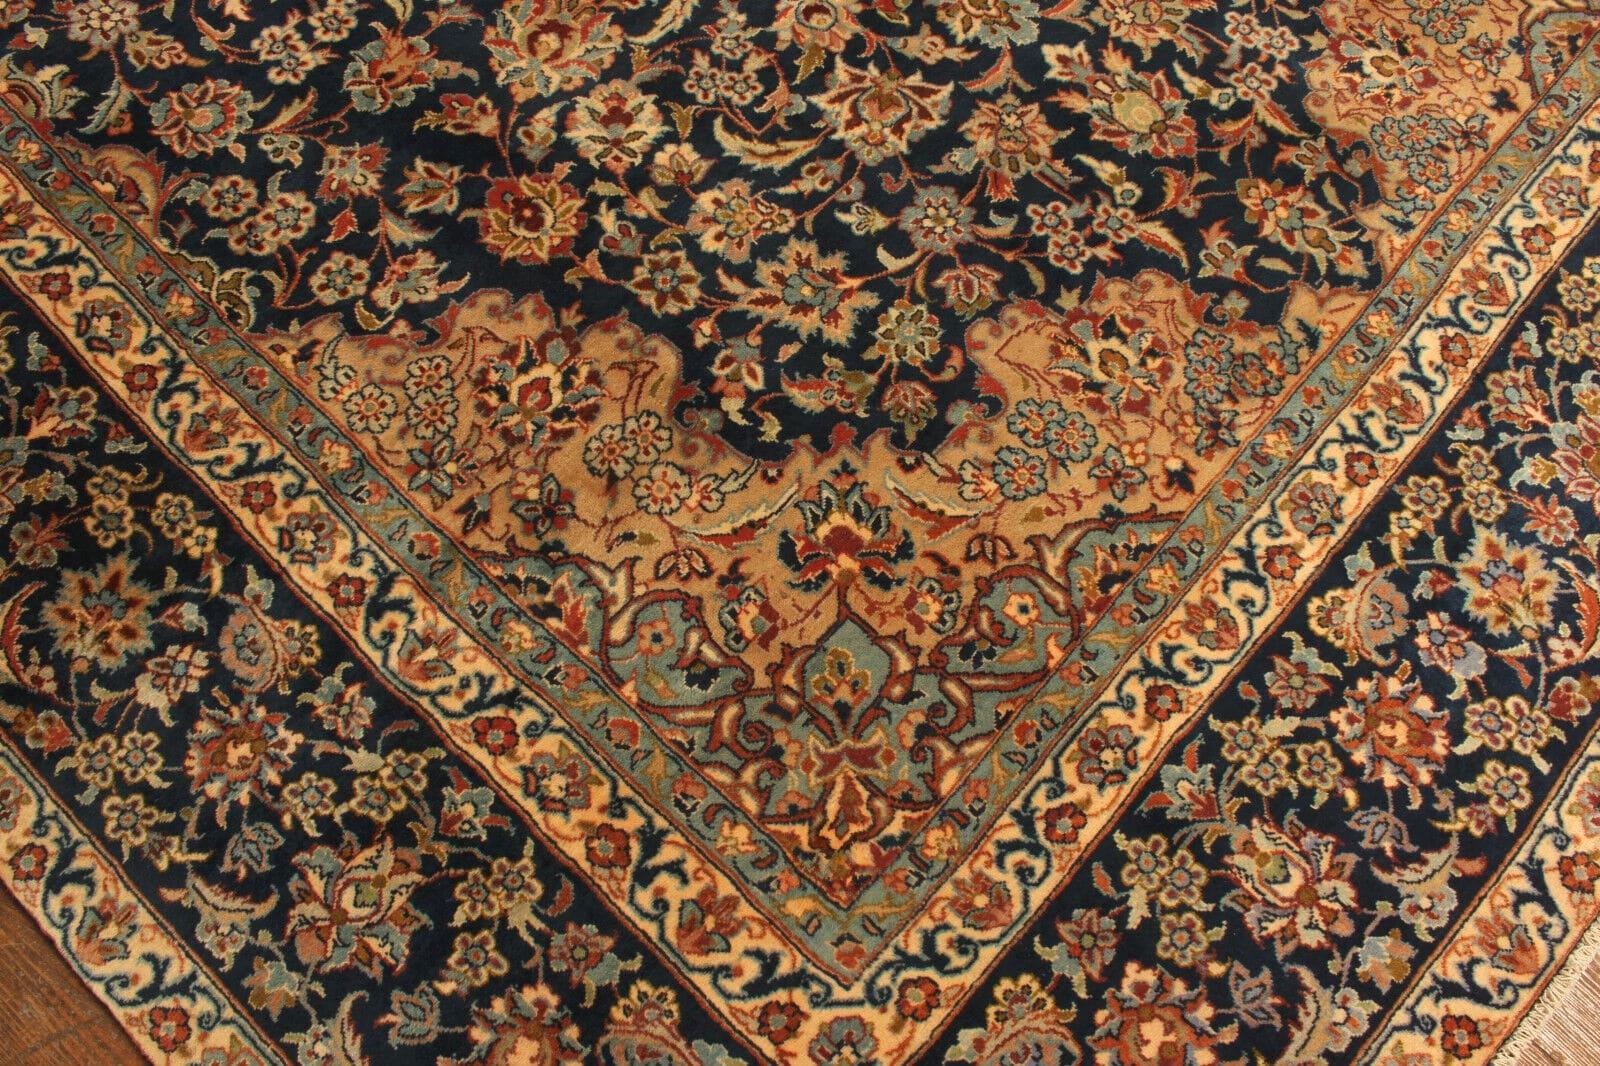 Handmade Vintage Persian Style Isfahan Rug 290cm x 458cm (9.5’ x 15’)

Step back in time with this exquisite Handmade Vintage Persian Style Isfahan Rug, a luxurious artifact from the 1970s. Crafted with meticulous attention to detail, this woolen